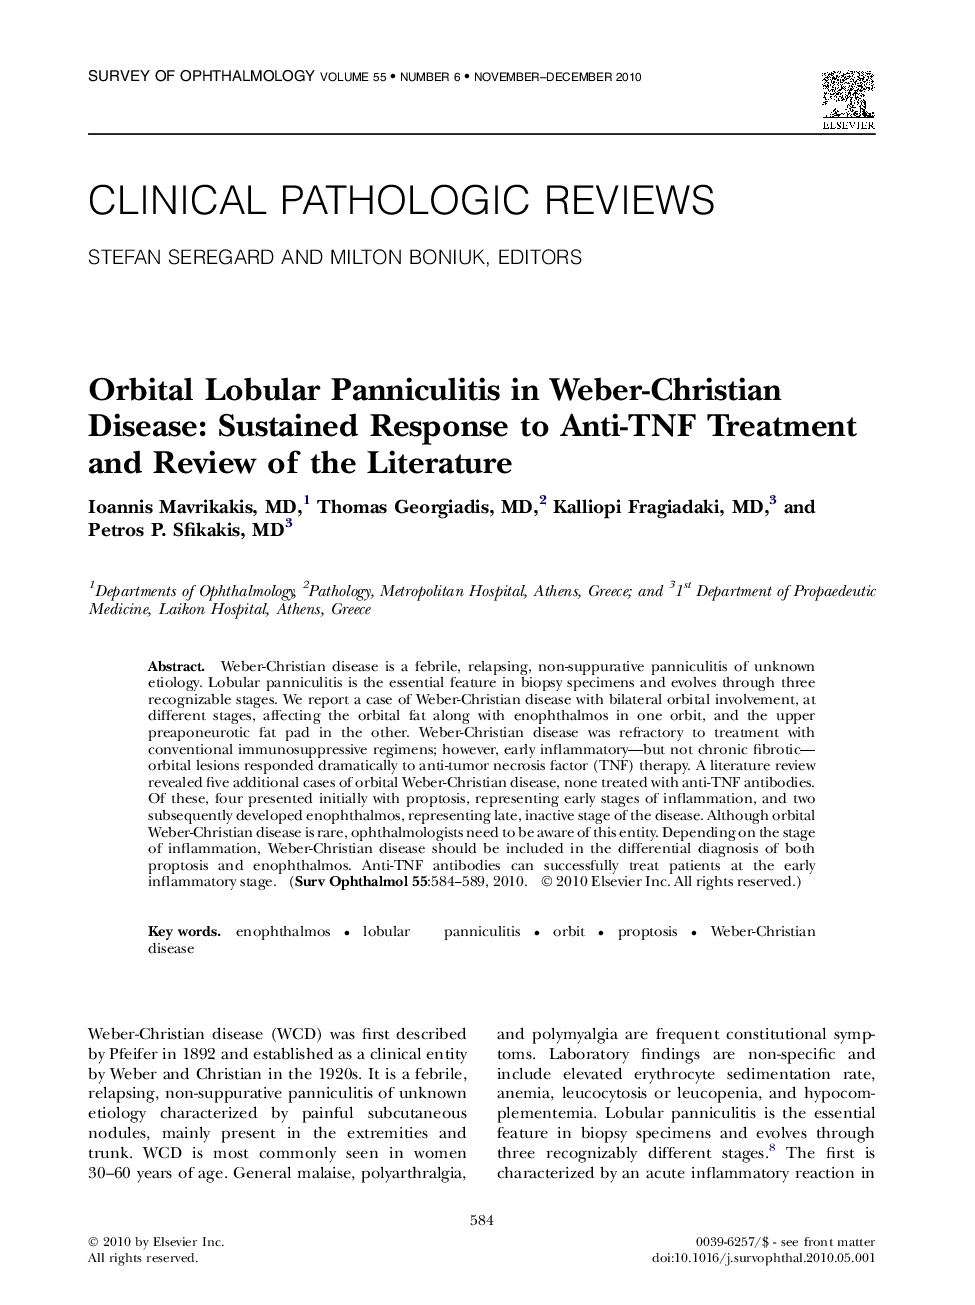 Orbital Lobular Panniculitis in Weber-Christian Disease: Sustained Response to Anti-TNF Treatment and Review of the Literature 